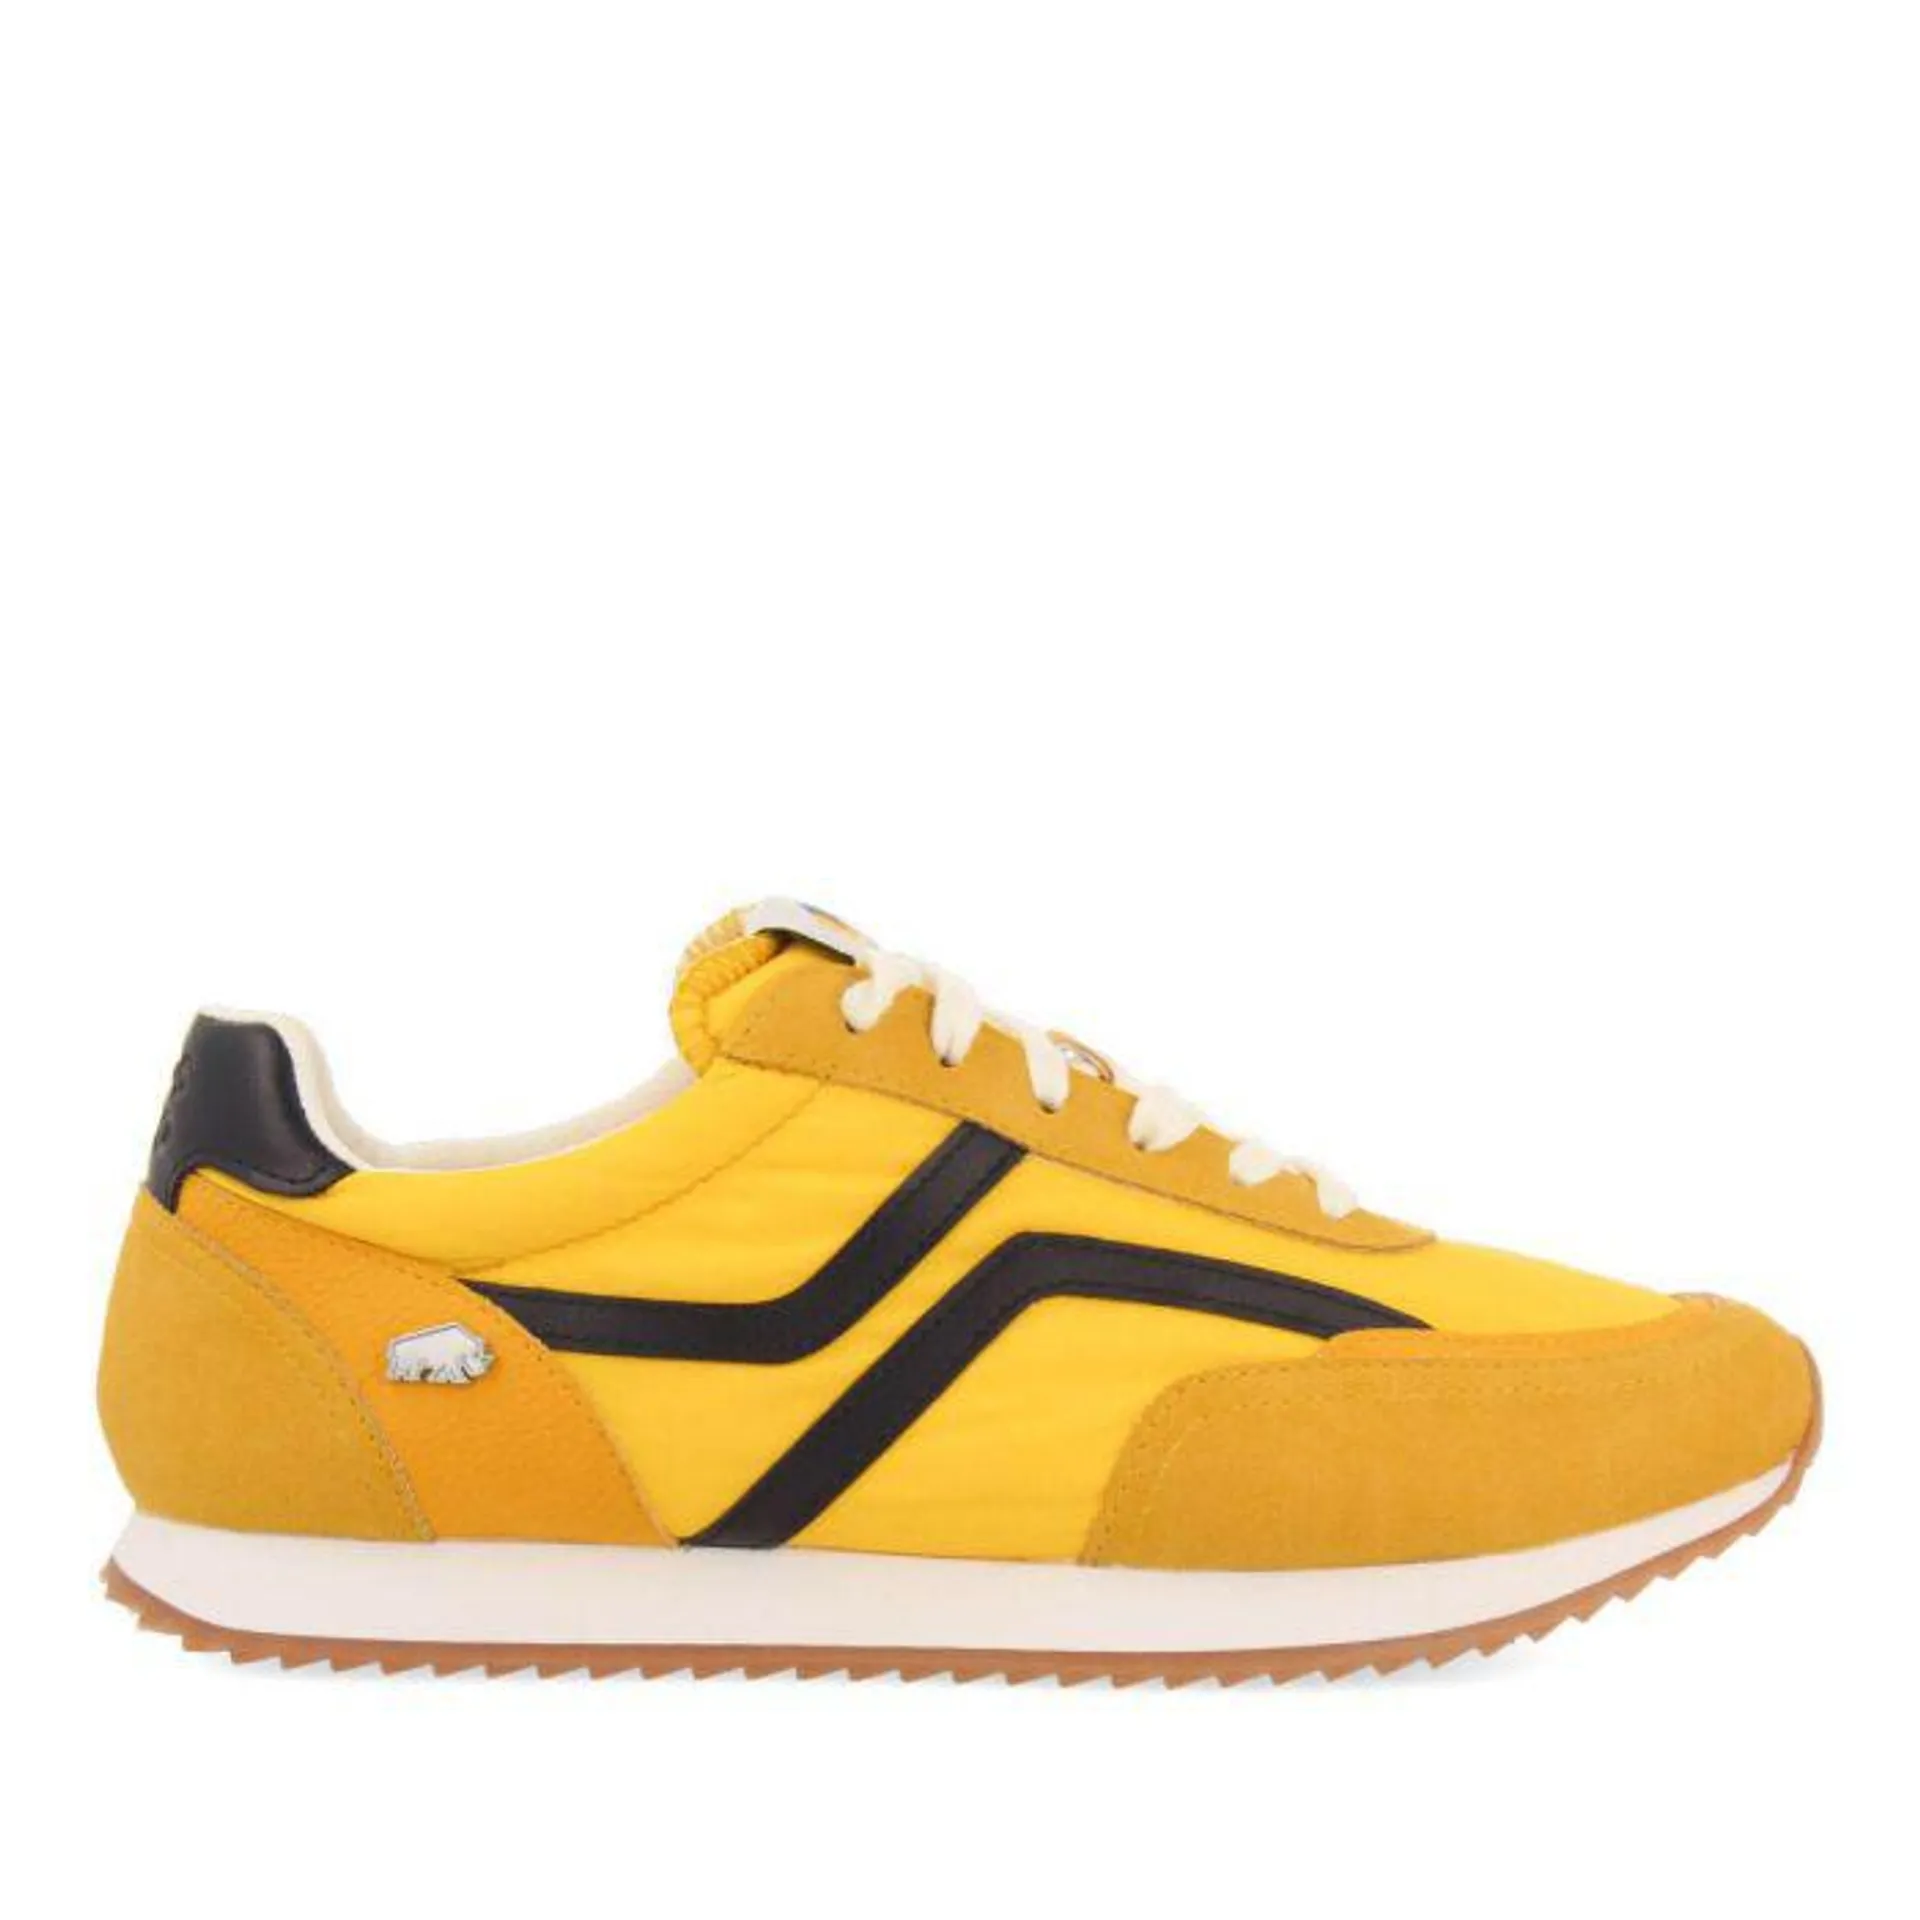 Anould mustard sneakers